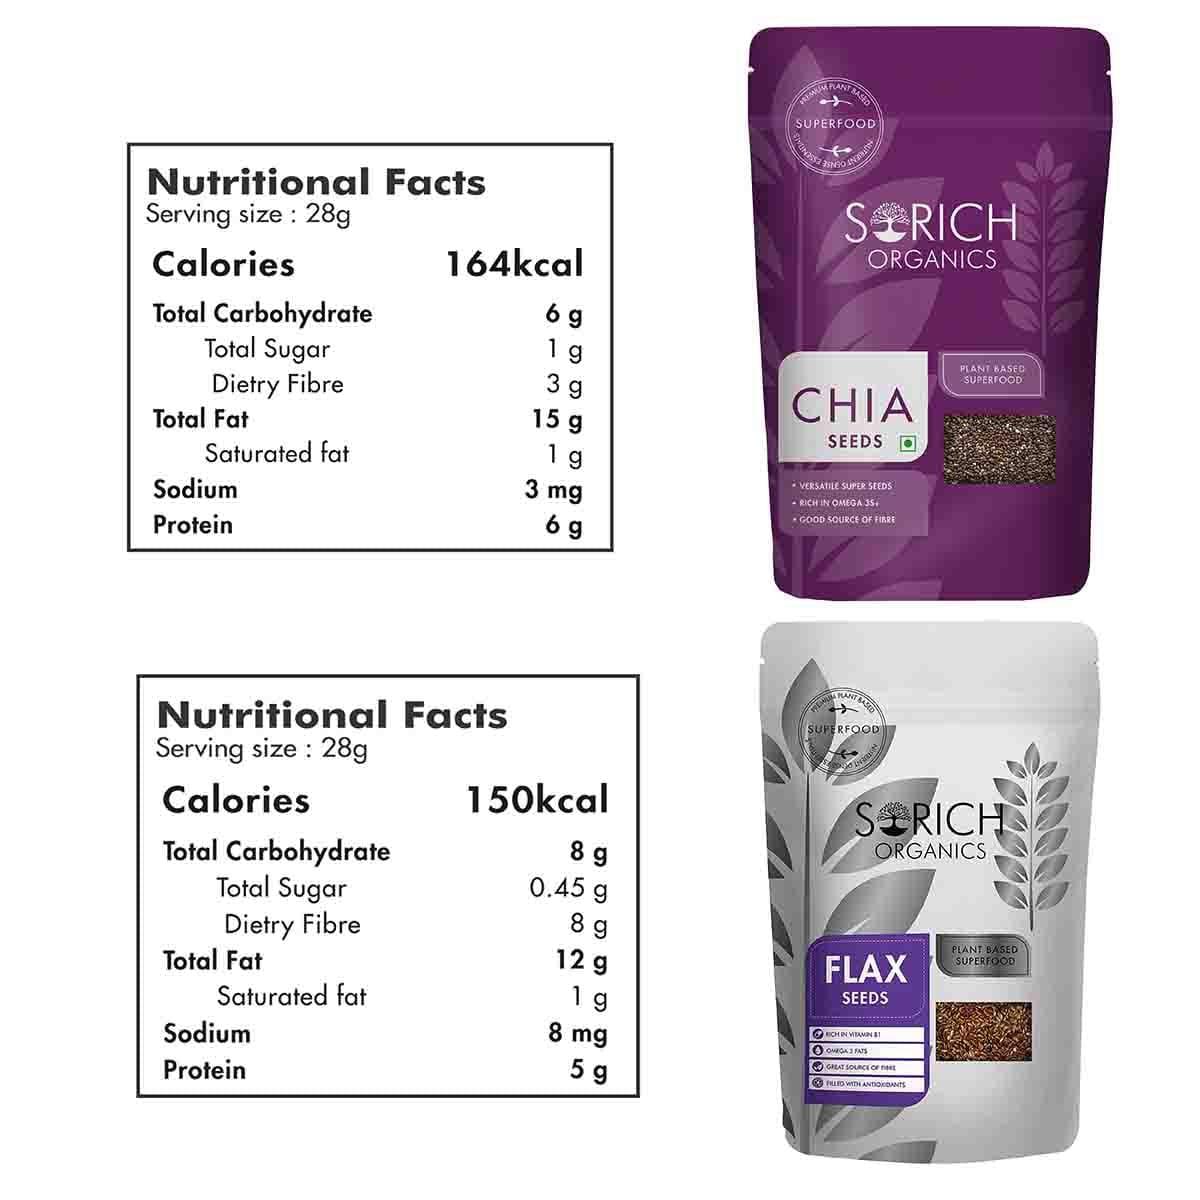 Flax & Chia Seeds Nutrition Facts